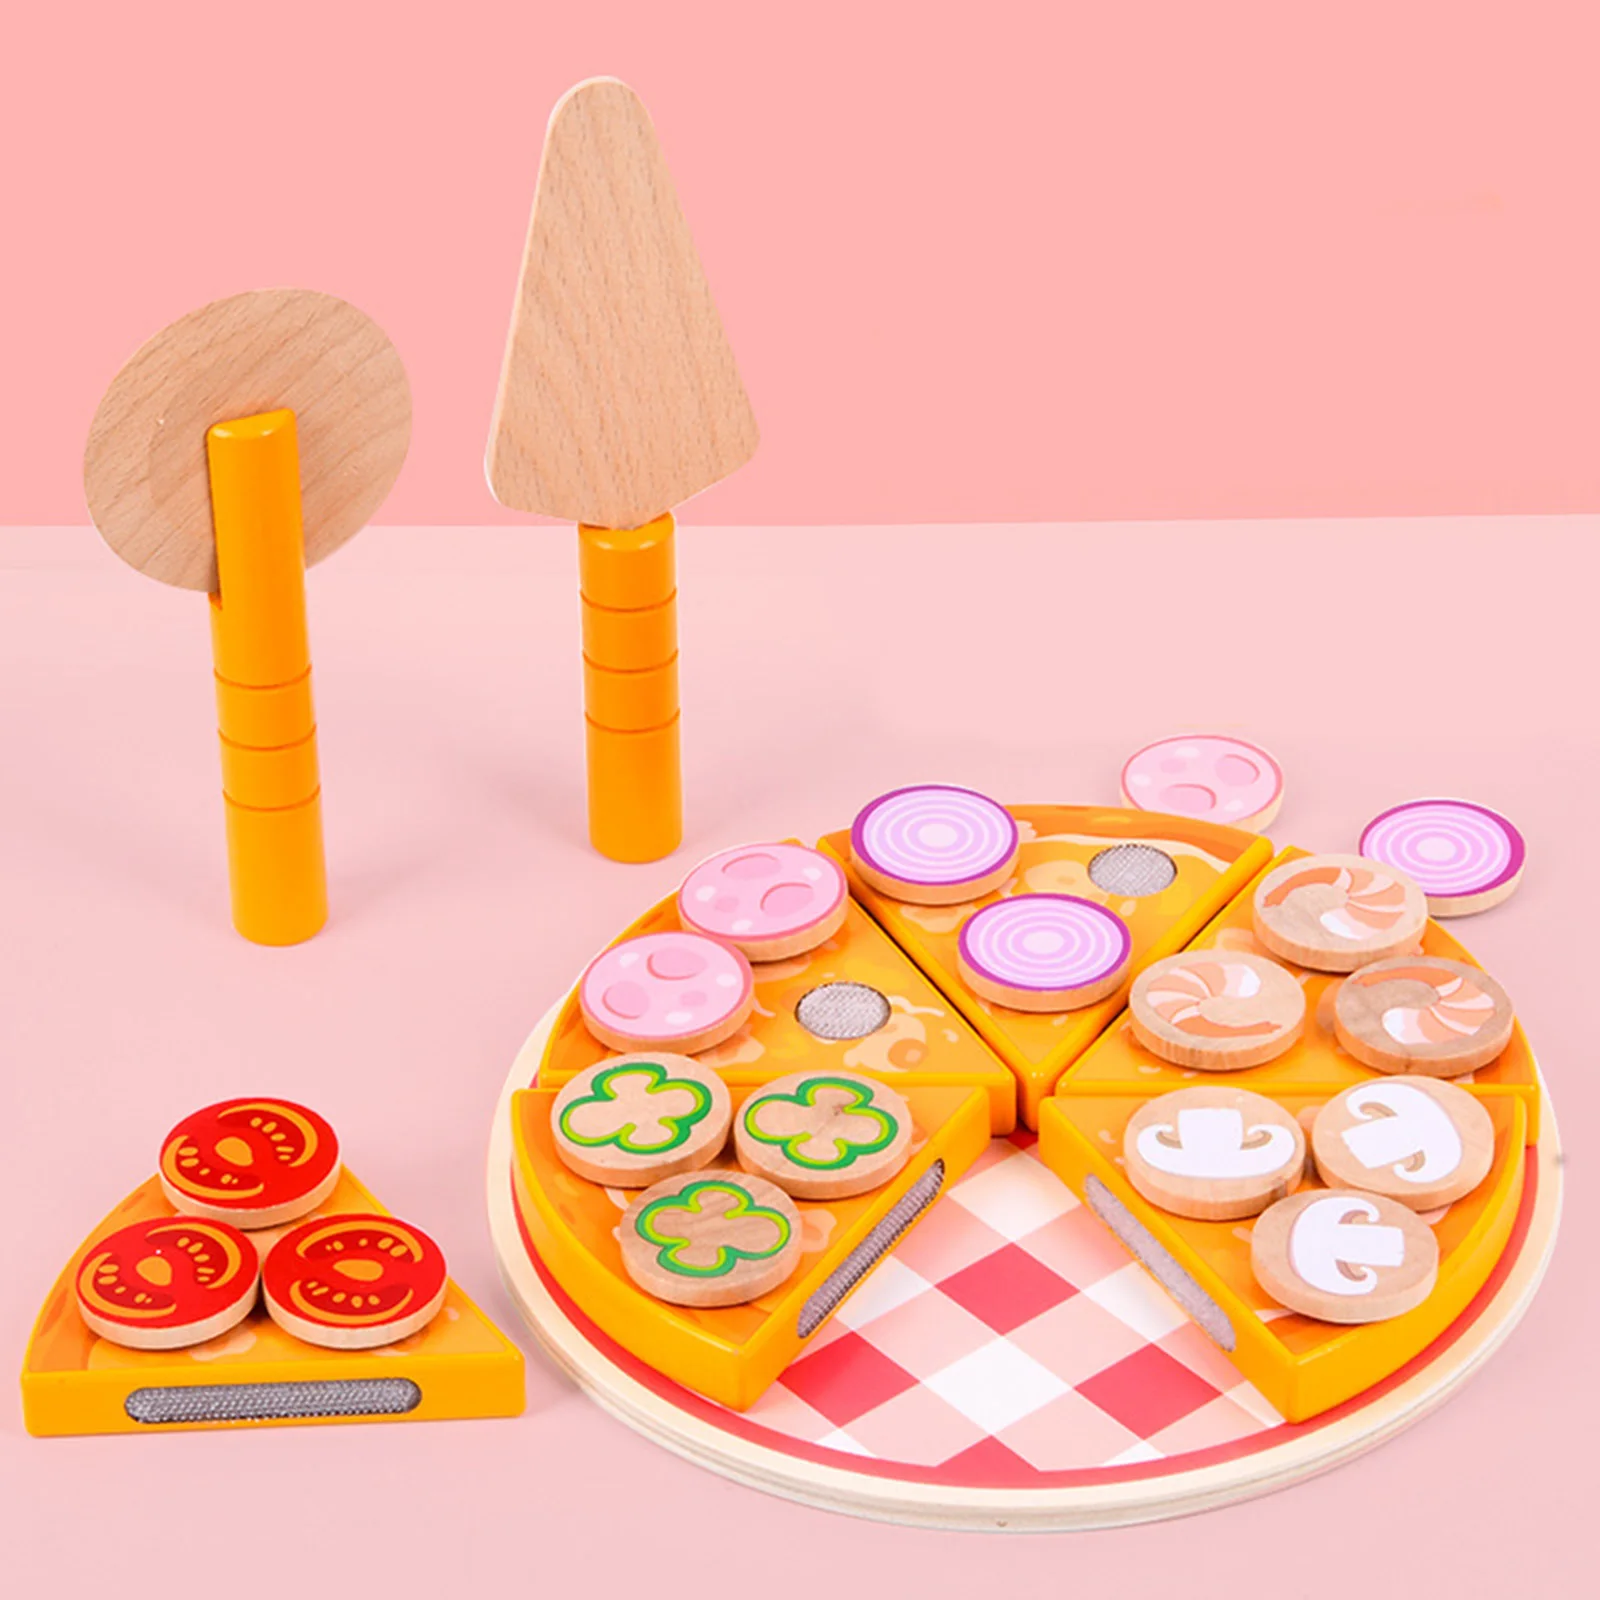 Children's Wooden Pizza Party Play Set Pretend Play Cutting Food for Age 3 +